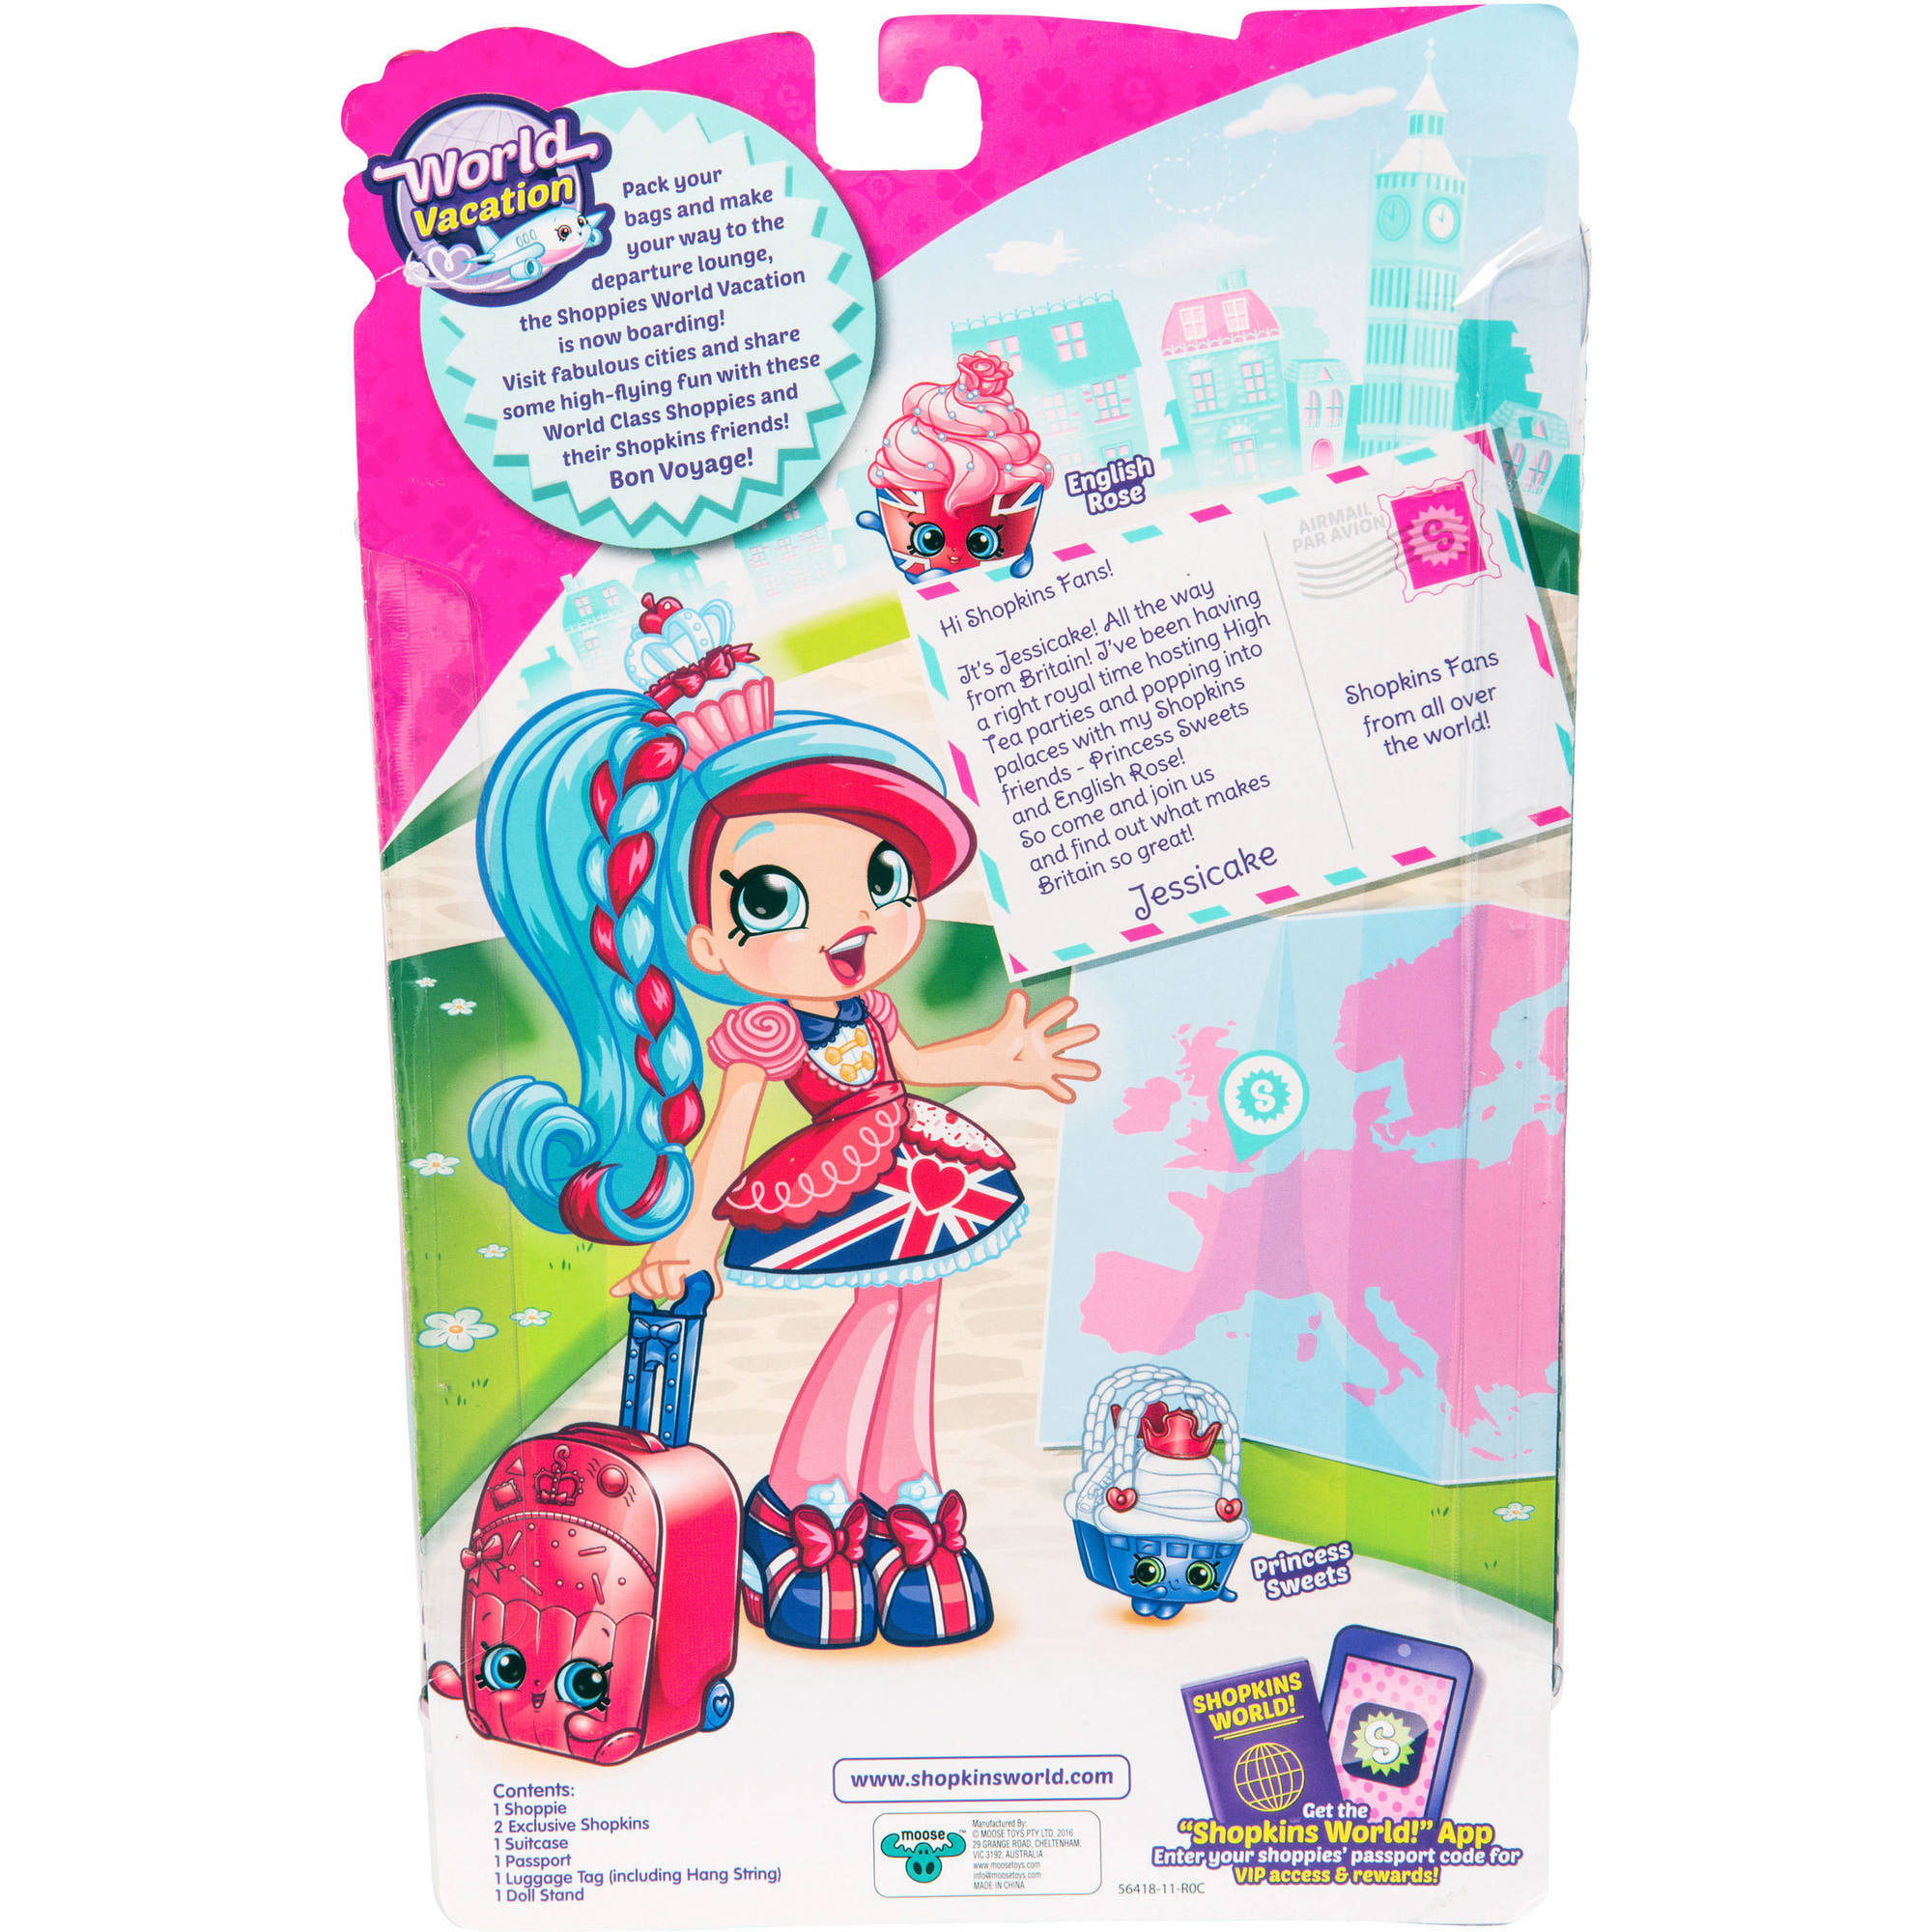 2 EXCLUSIVES SHOPKINS COMBINED SHIPPING SHOPKINS SHOPPIES JESSICAKE & VIP CARD 